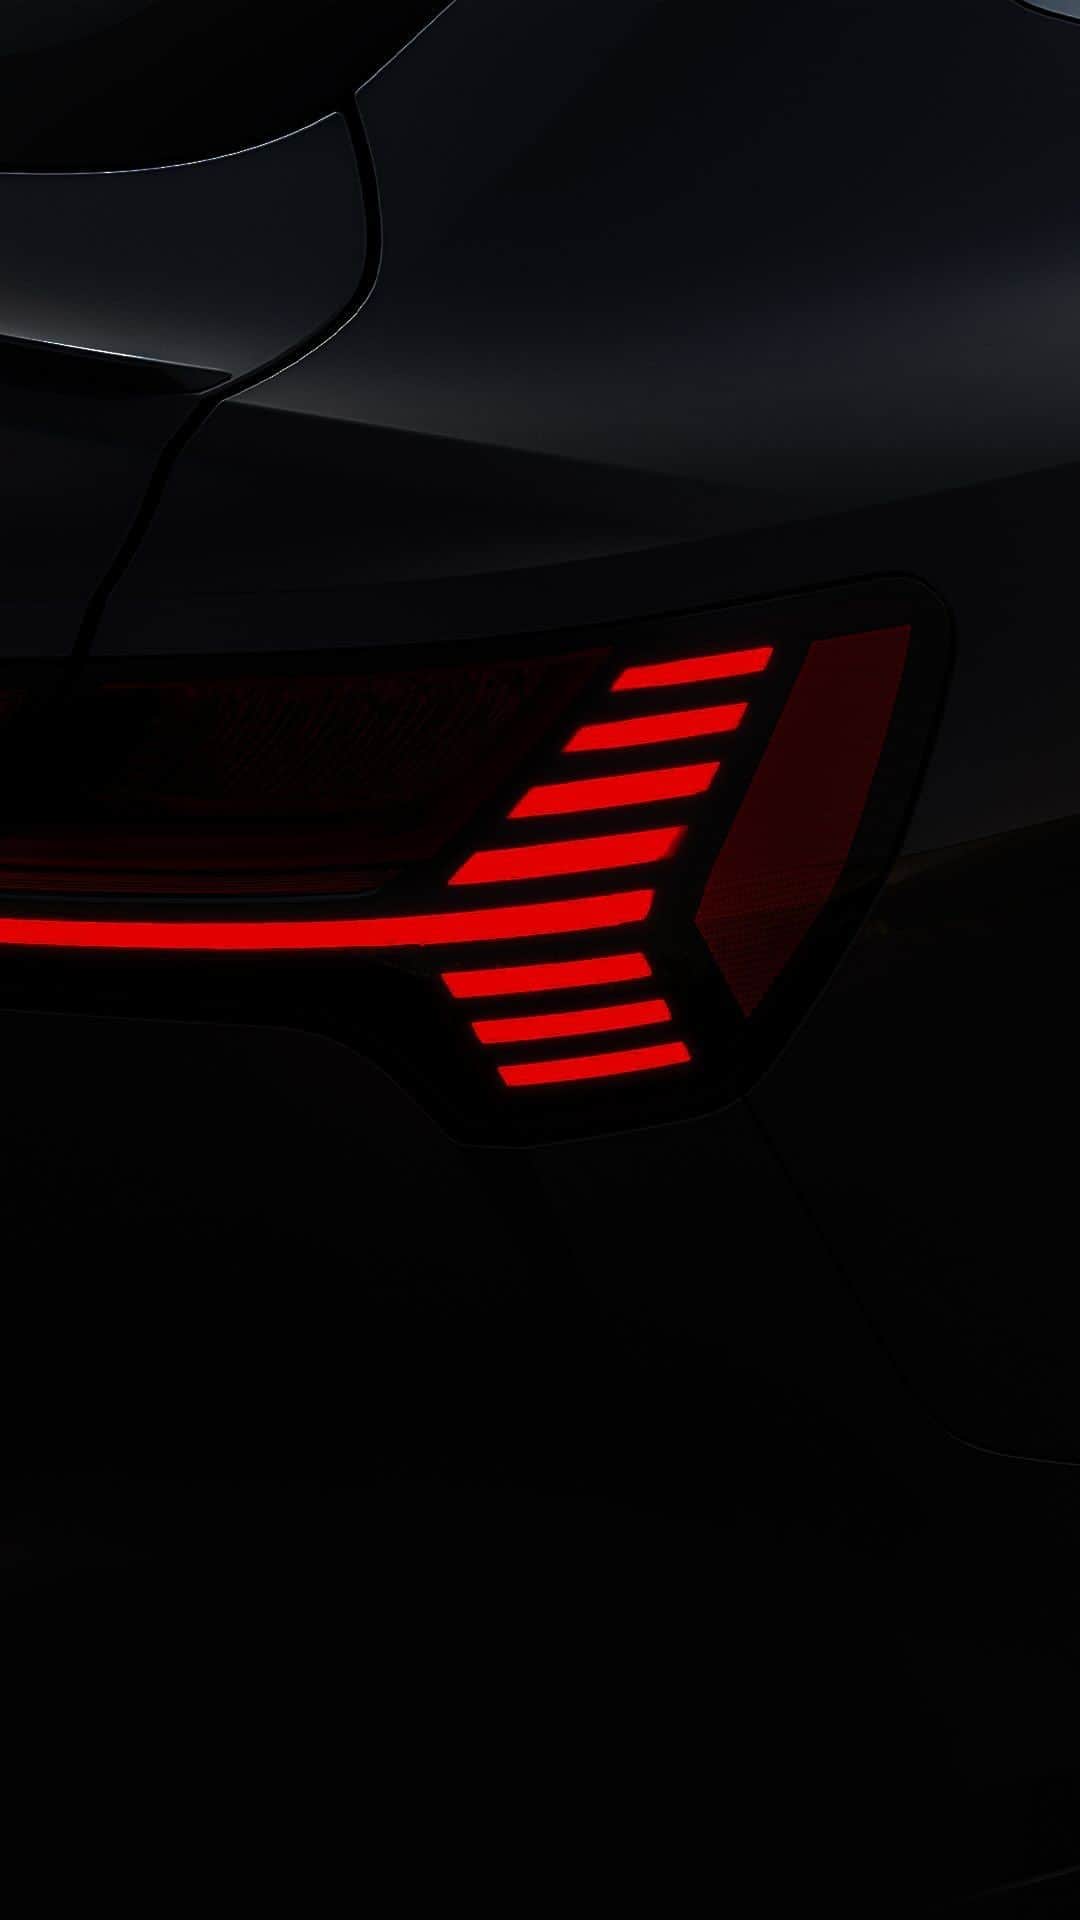 Audiのインスタグラム：「Signature lighting for a confident drive. The Audi Q8 e-tron Digital Matrix LED headlights allow you to experience the future in lighting innovation.  Discover more about Audi’s lighting technology at the link in our bio.  #Audi #FutureIsAnAttitude #eMobility #AudiQ8etron #LightDay #technology #digitalization」